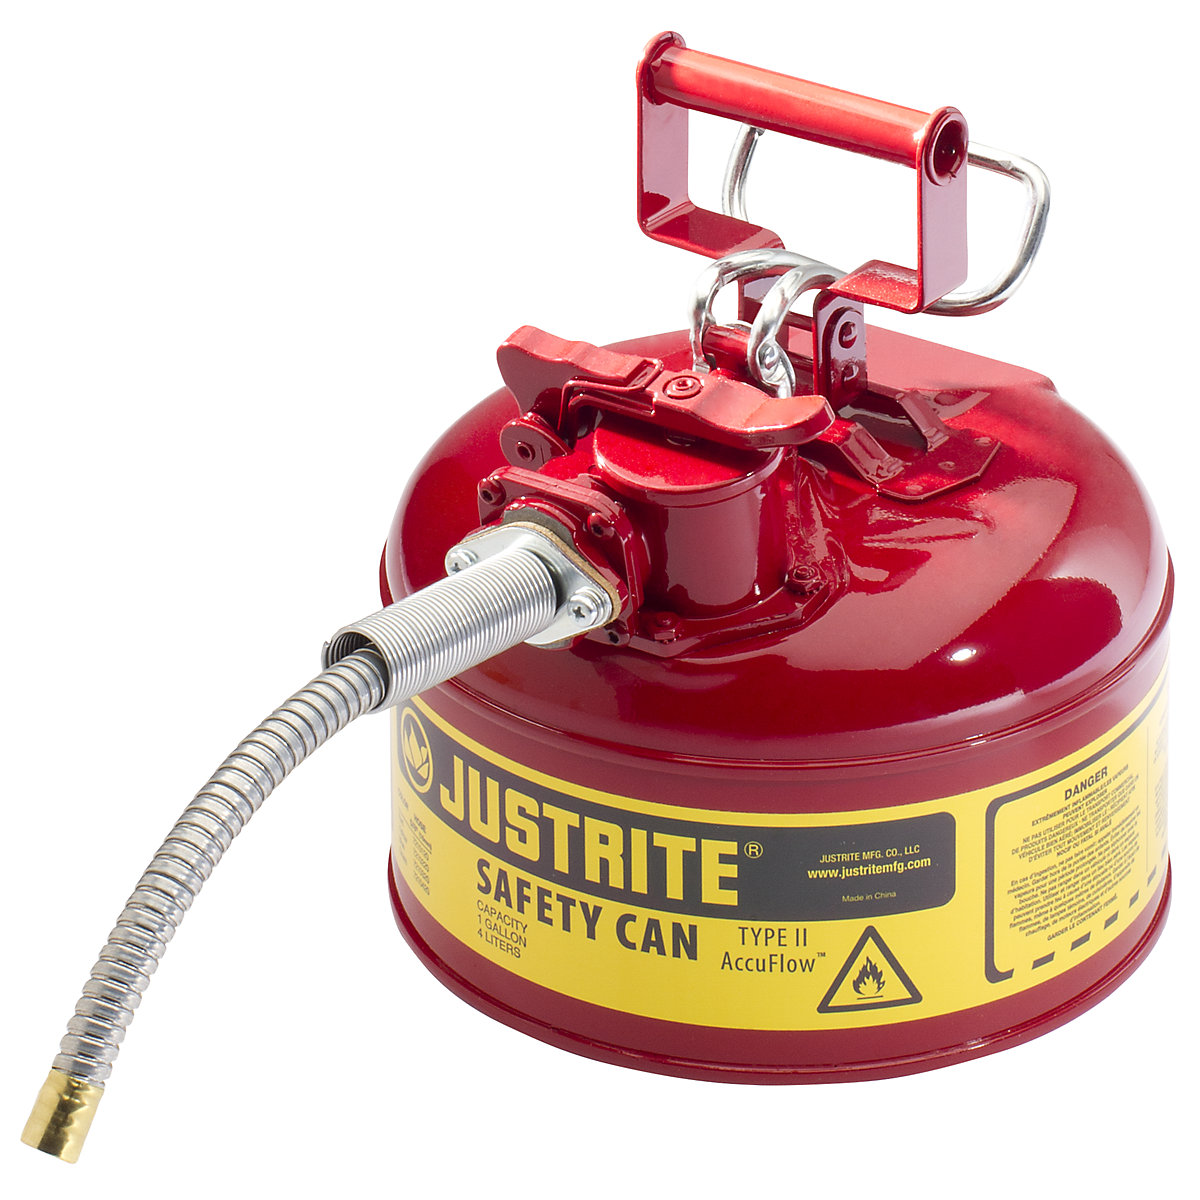 Safety container with flexible metal spout - Justrite